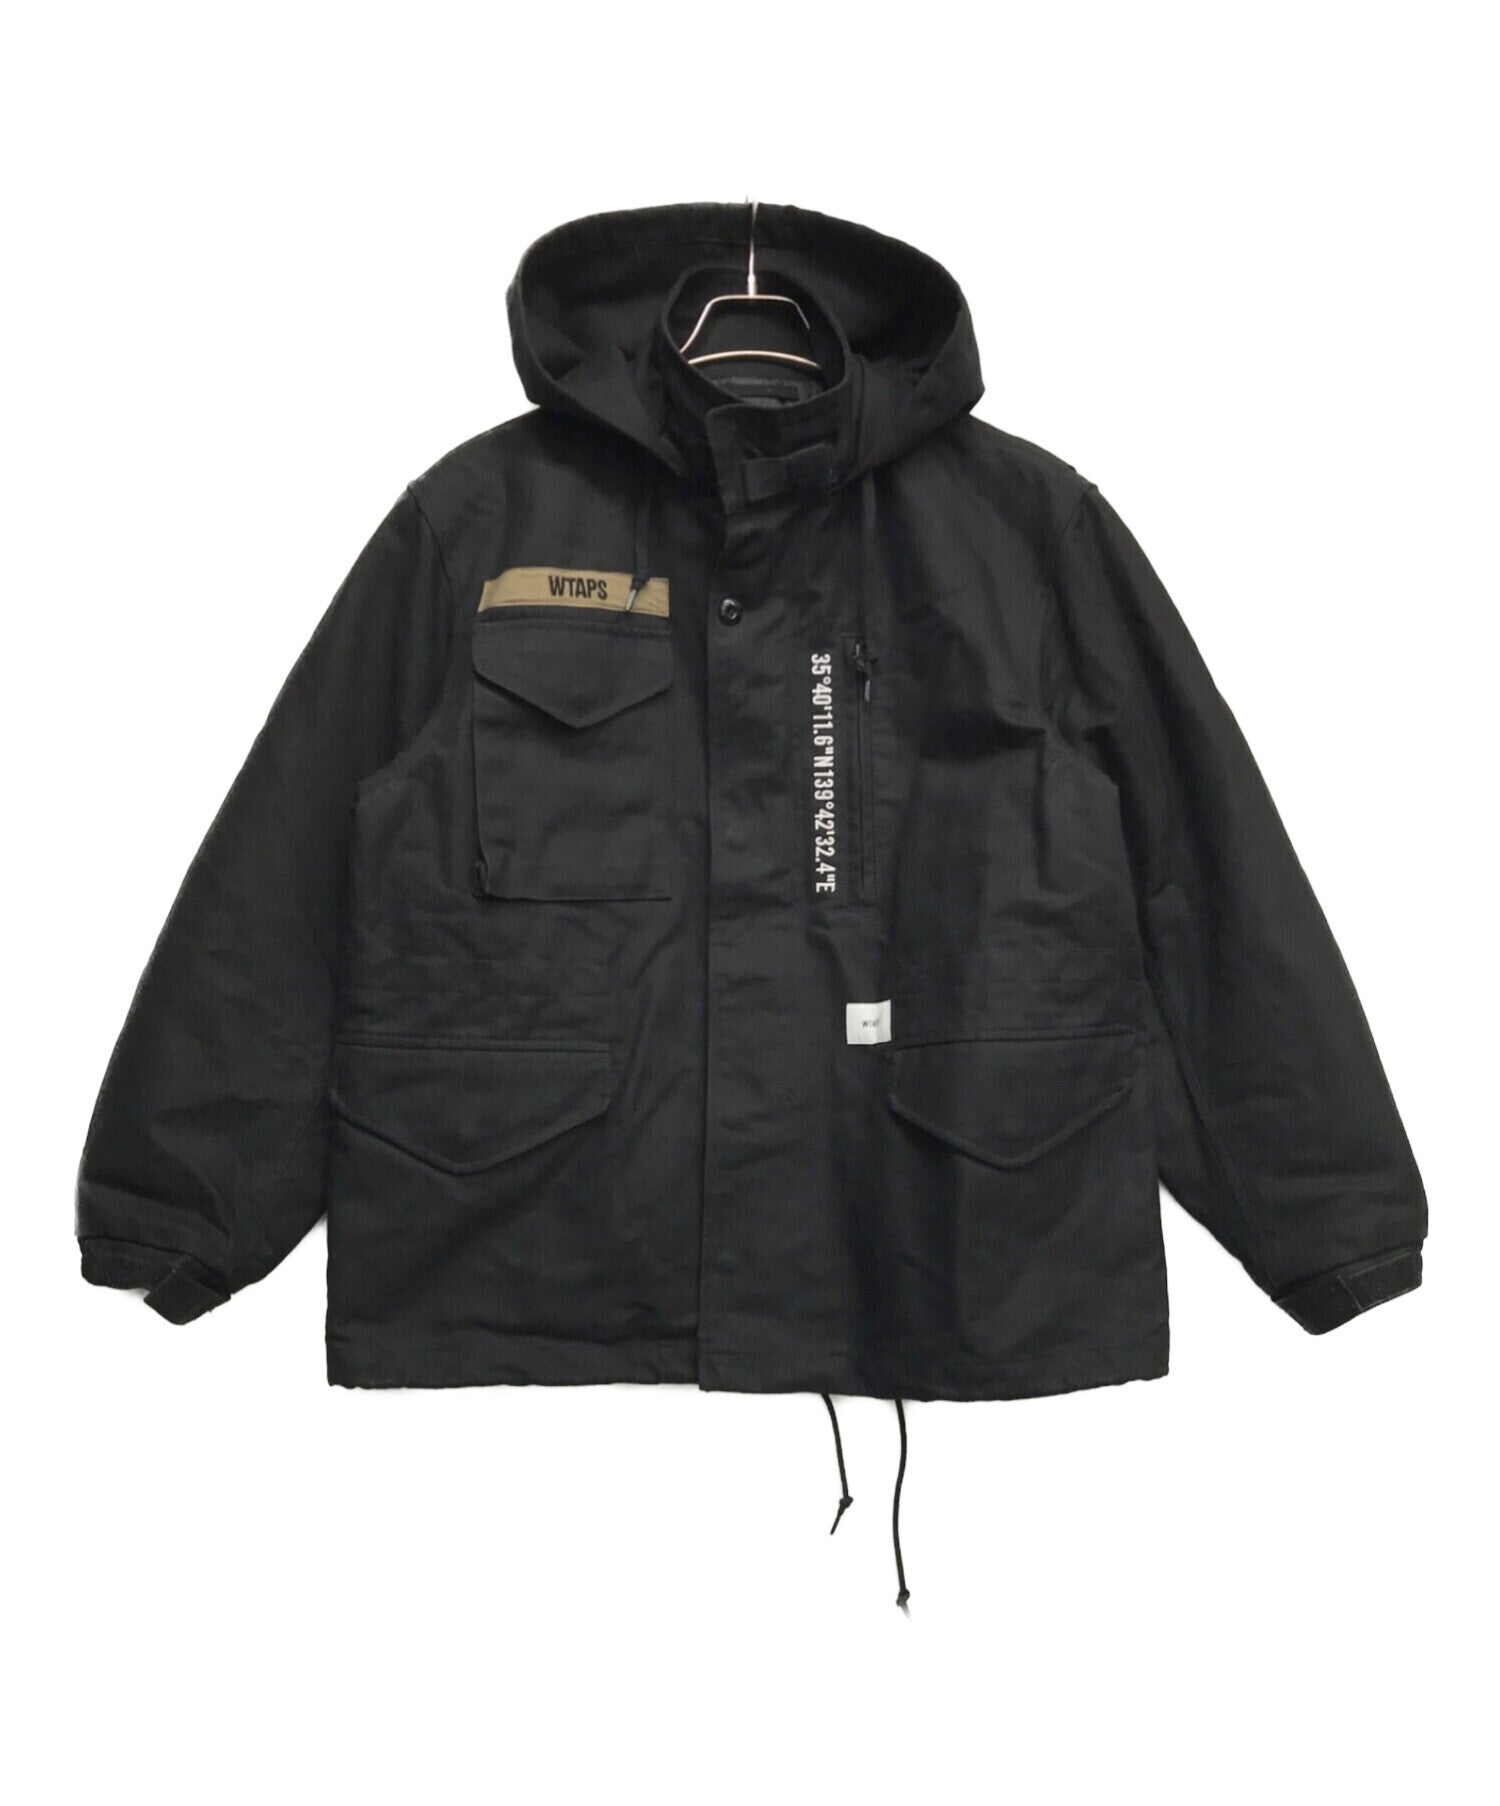 WTAPS Double S.F.M. Cotton Twill Jacket M-65 202WVDT